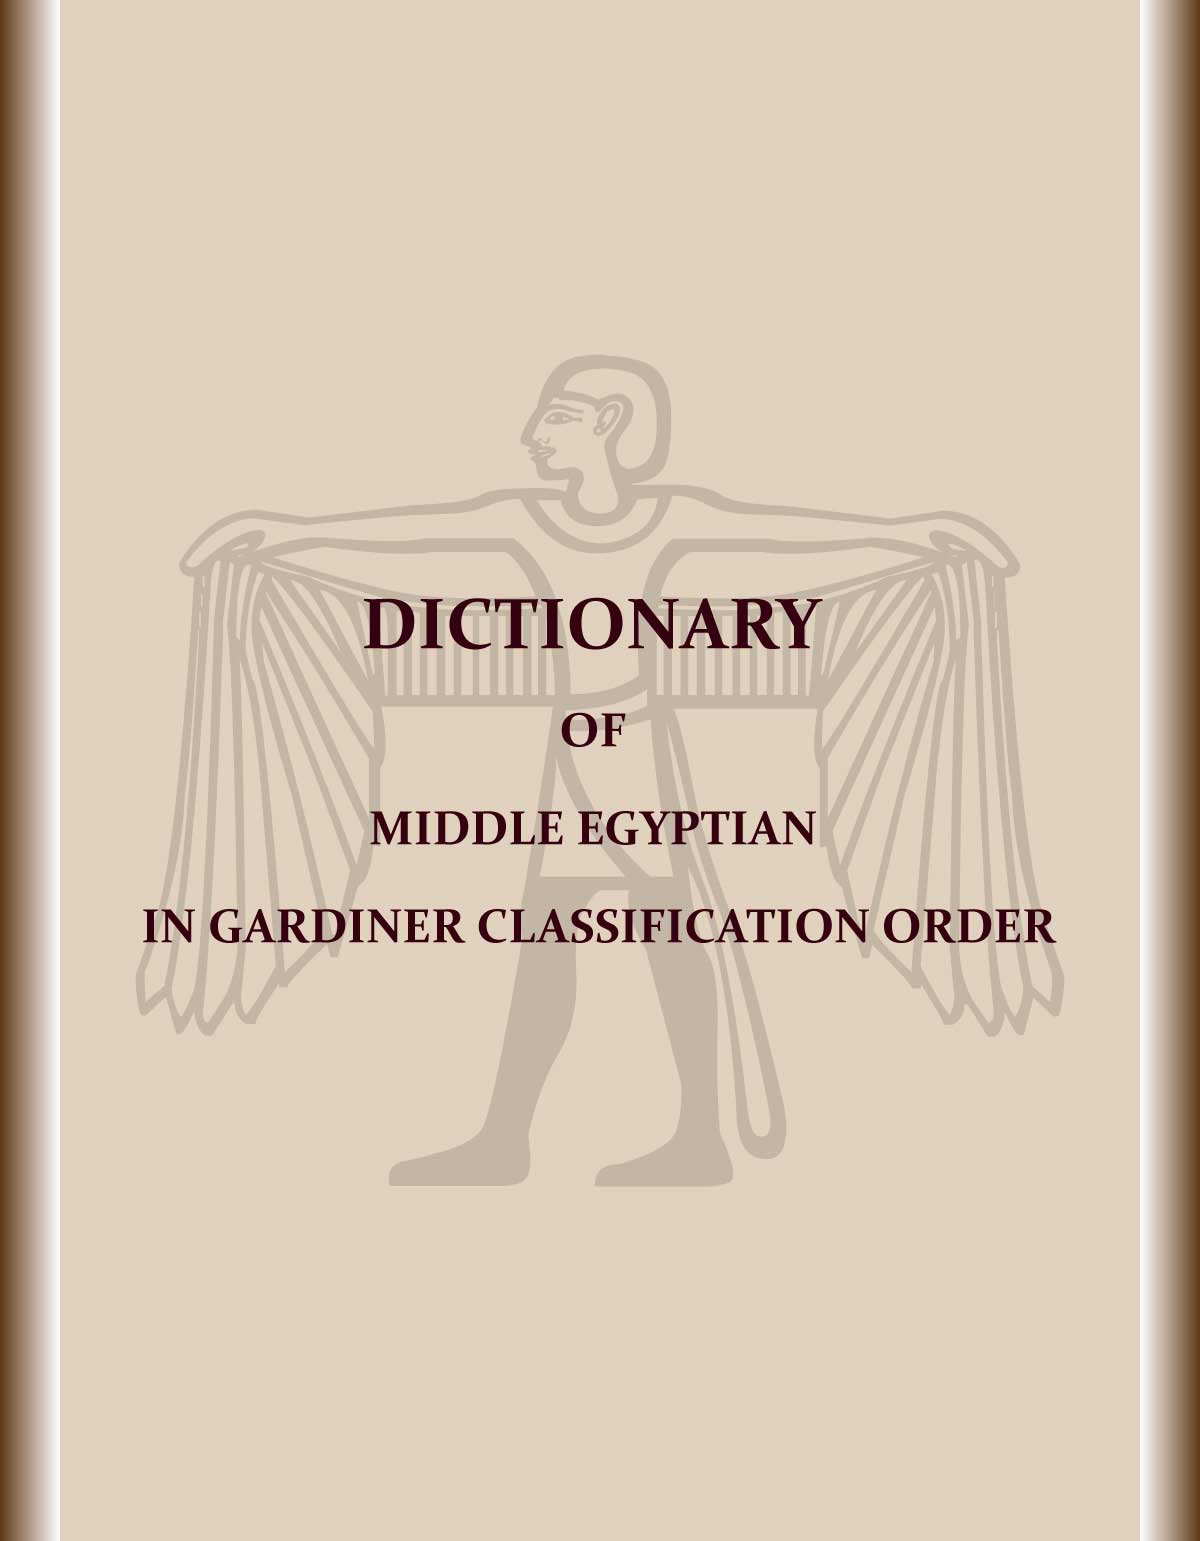 Dictionary-of-Middle-Egyptian-in-Gardiner-Classification-Order-book-cover